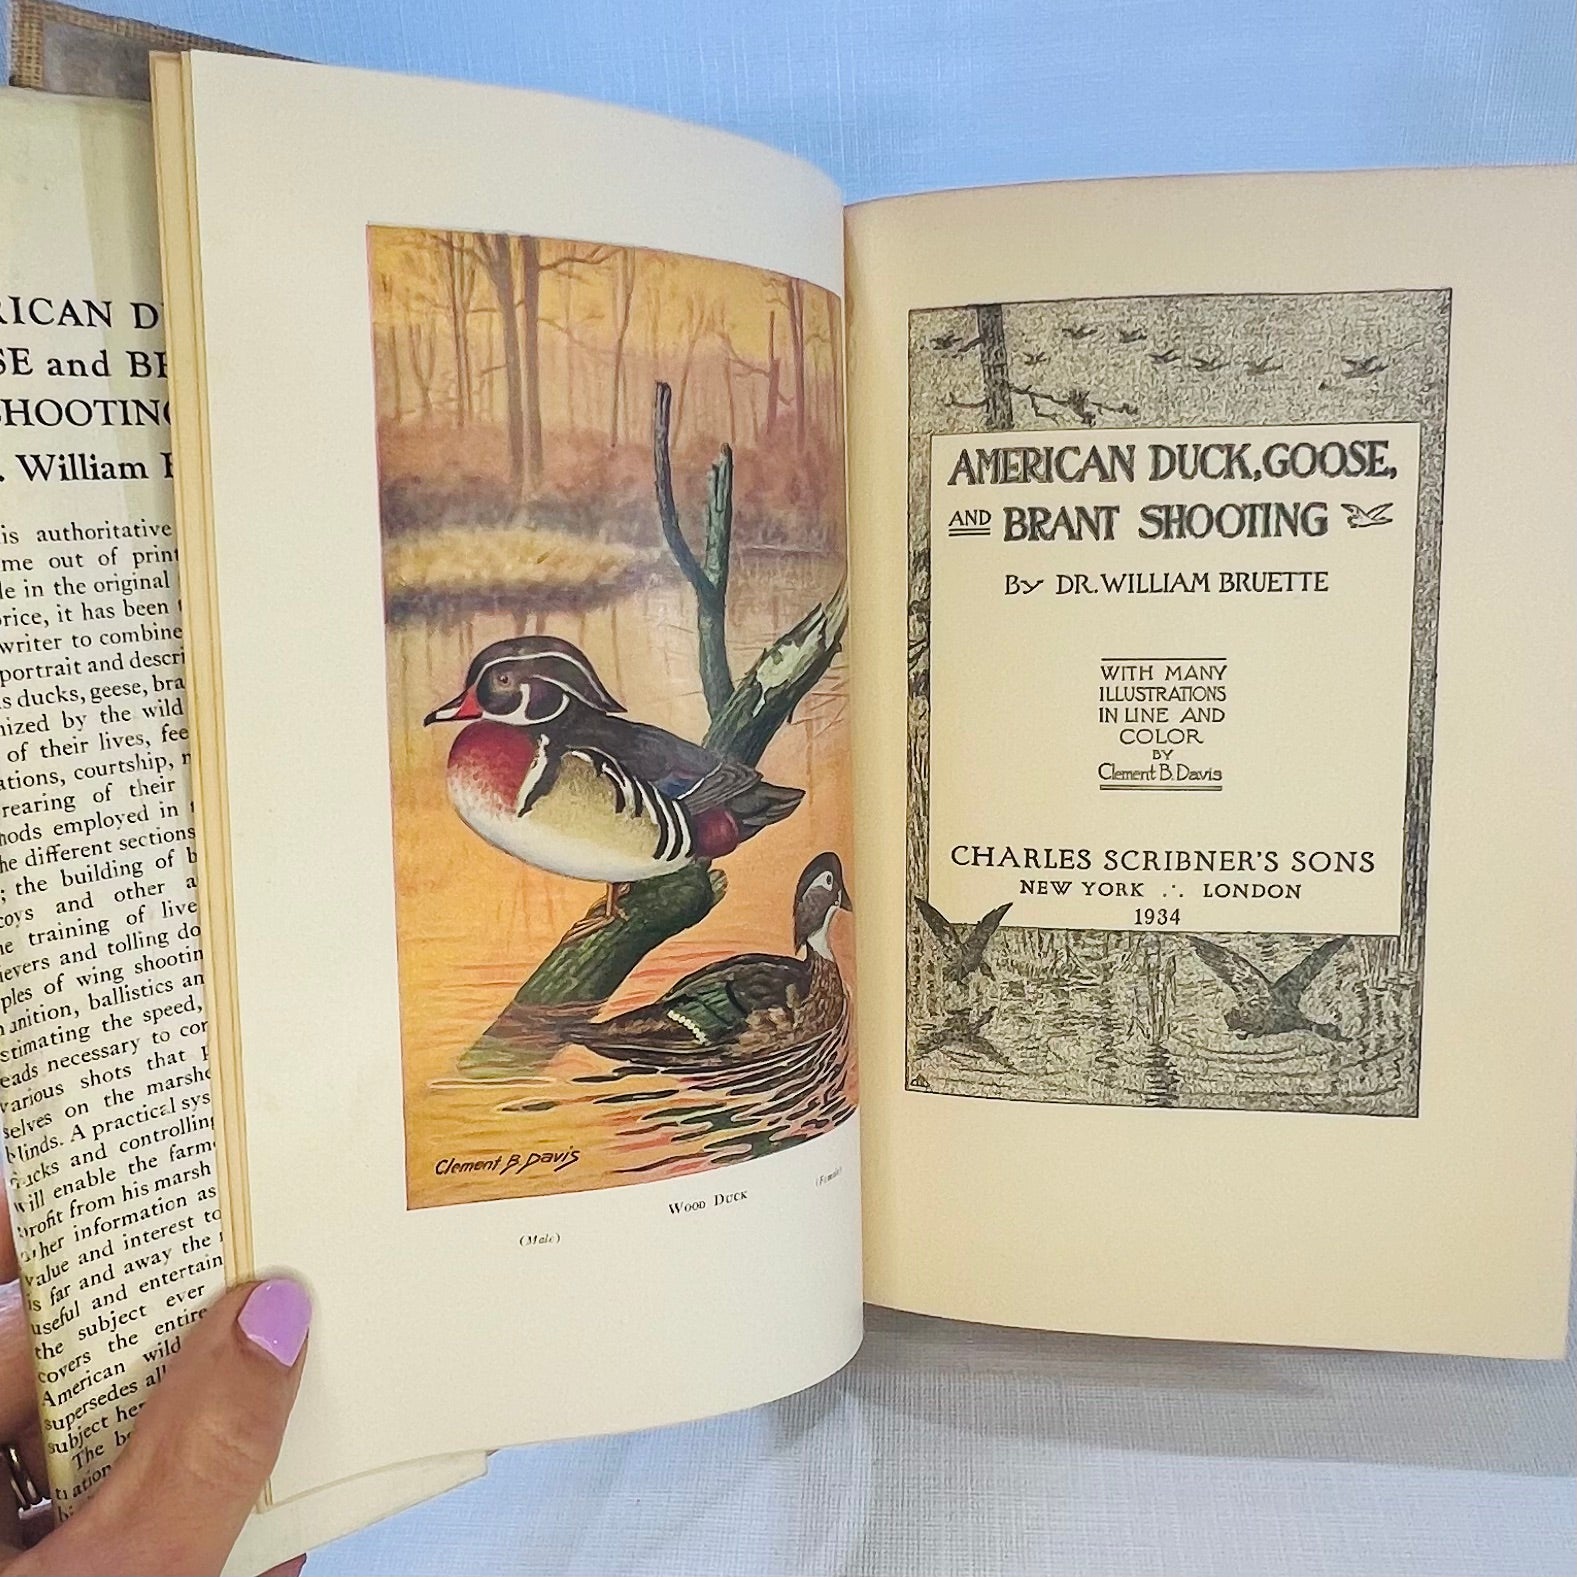 American Duck Goose & Brant Shooting by Dr. William Bruette inline and Color Illustrations by Clement B. Davis 1934 Charles Scribners Sons